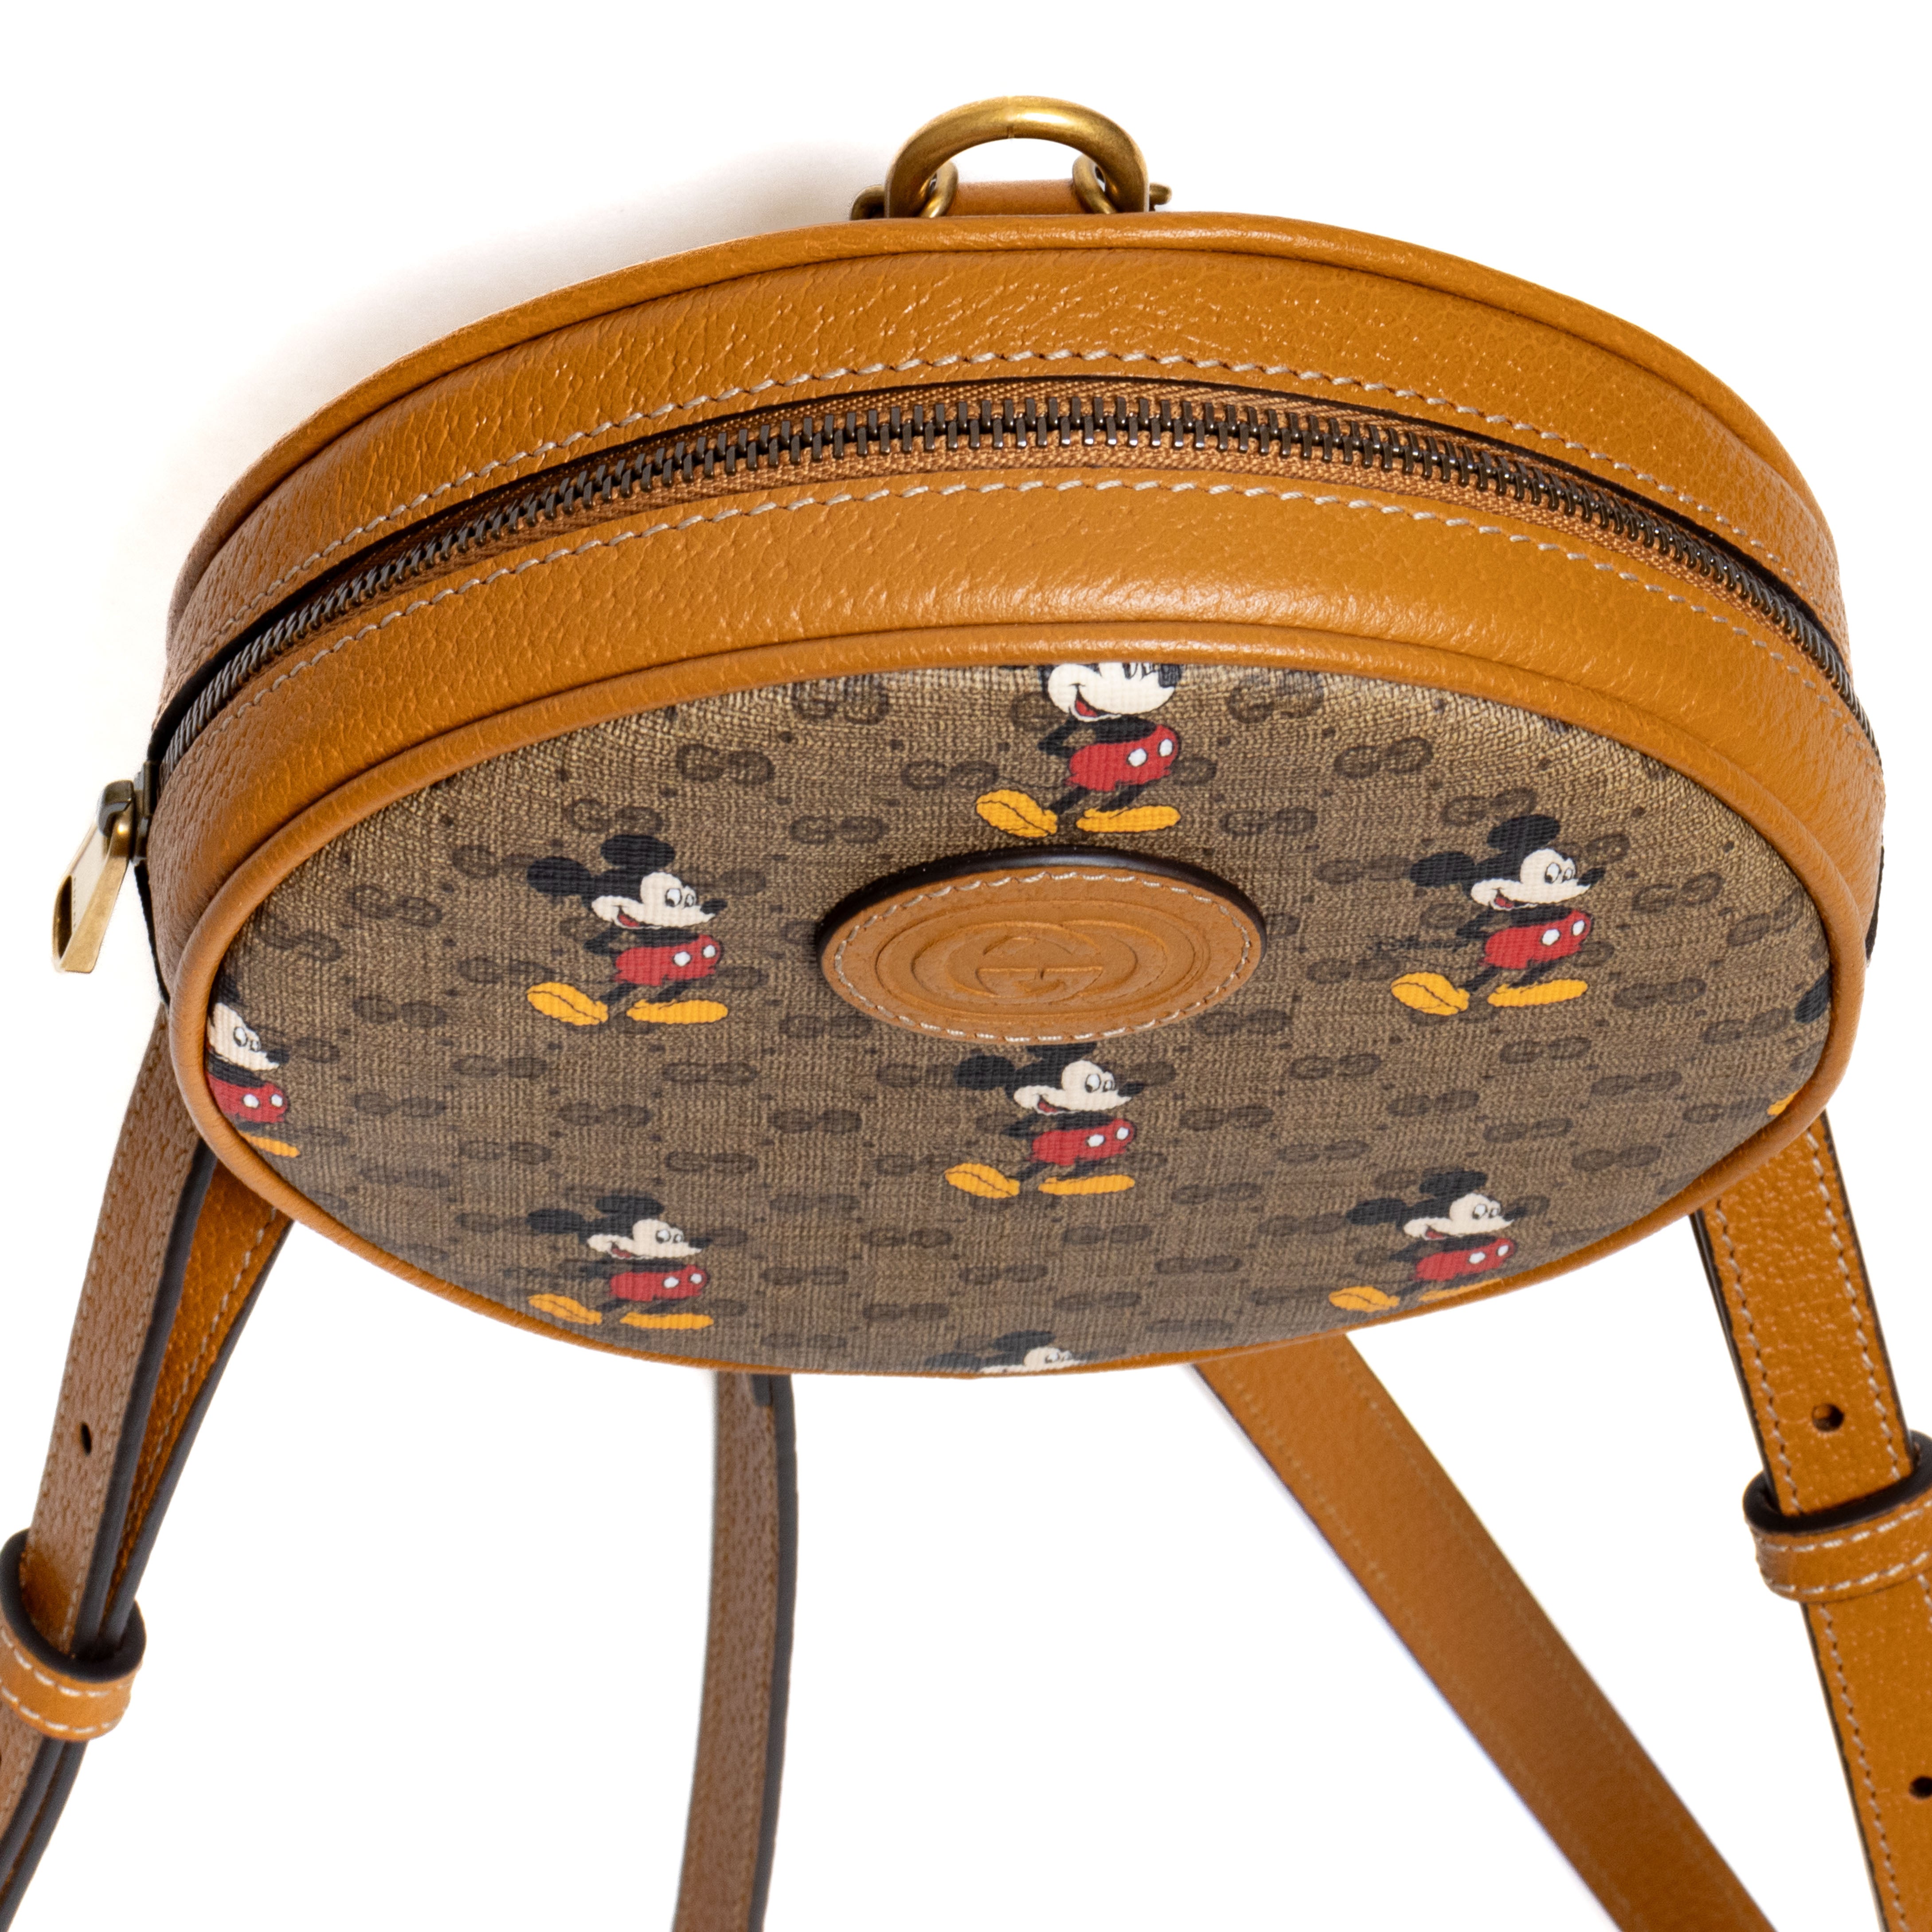 JOHN MAYER - Louis Vuitton luggage featuring Mickey Mouse